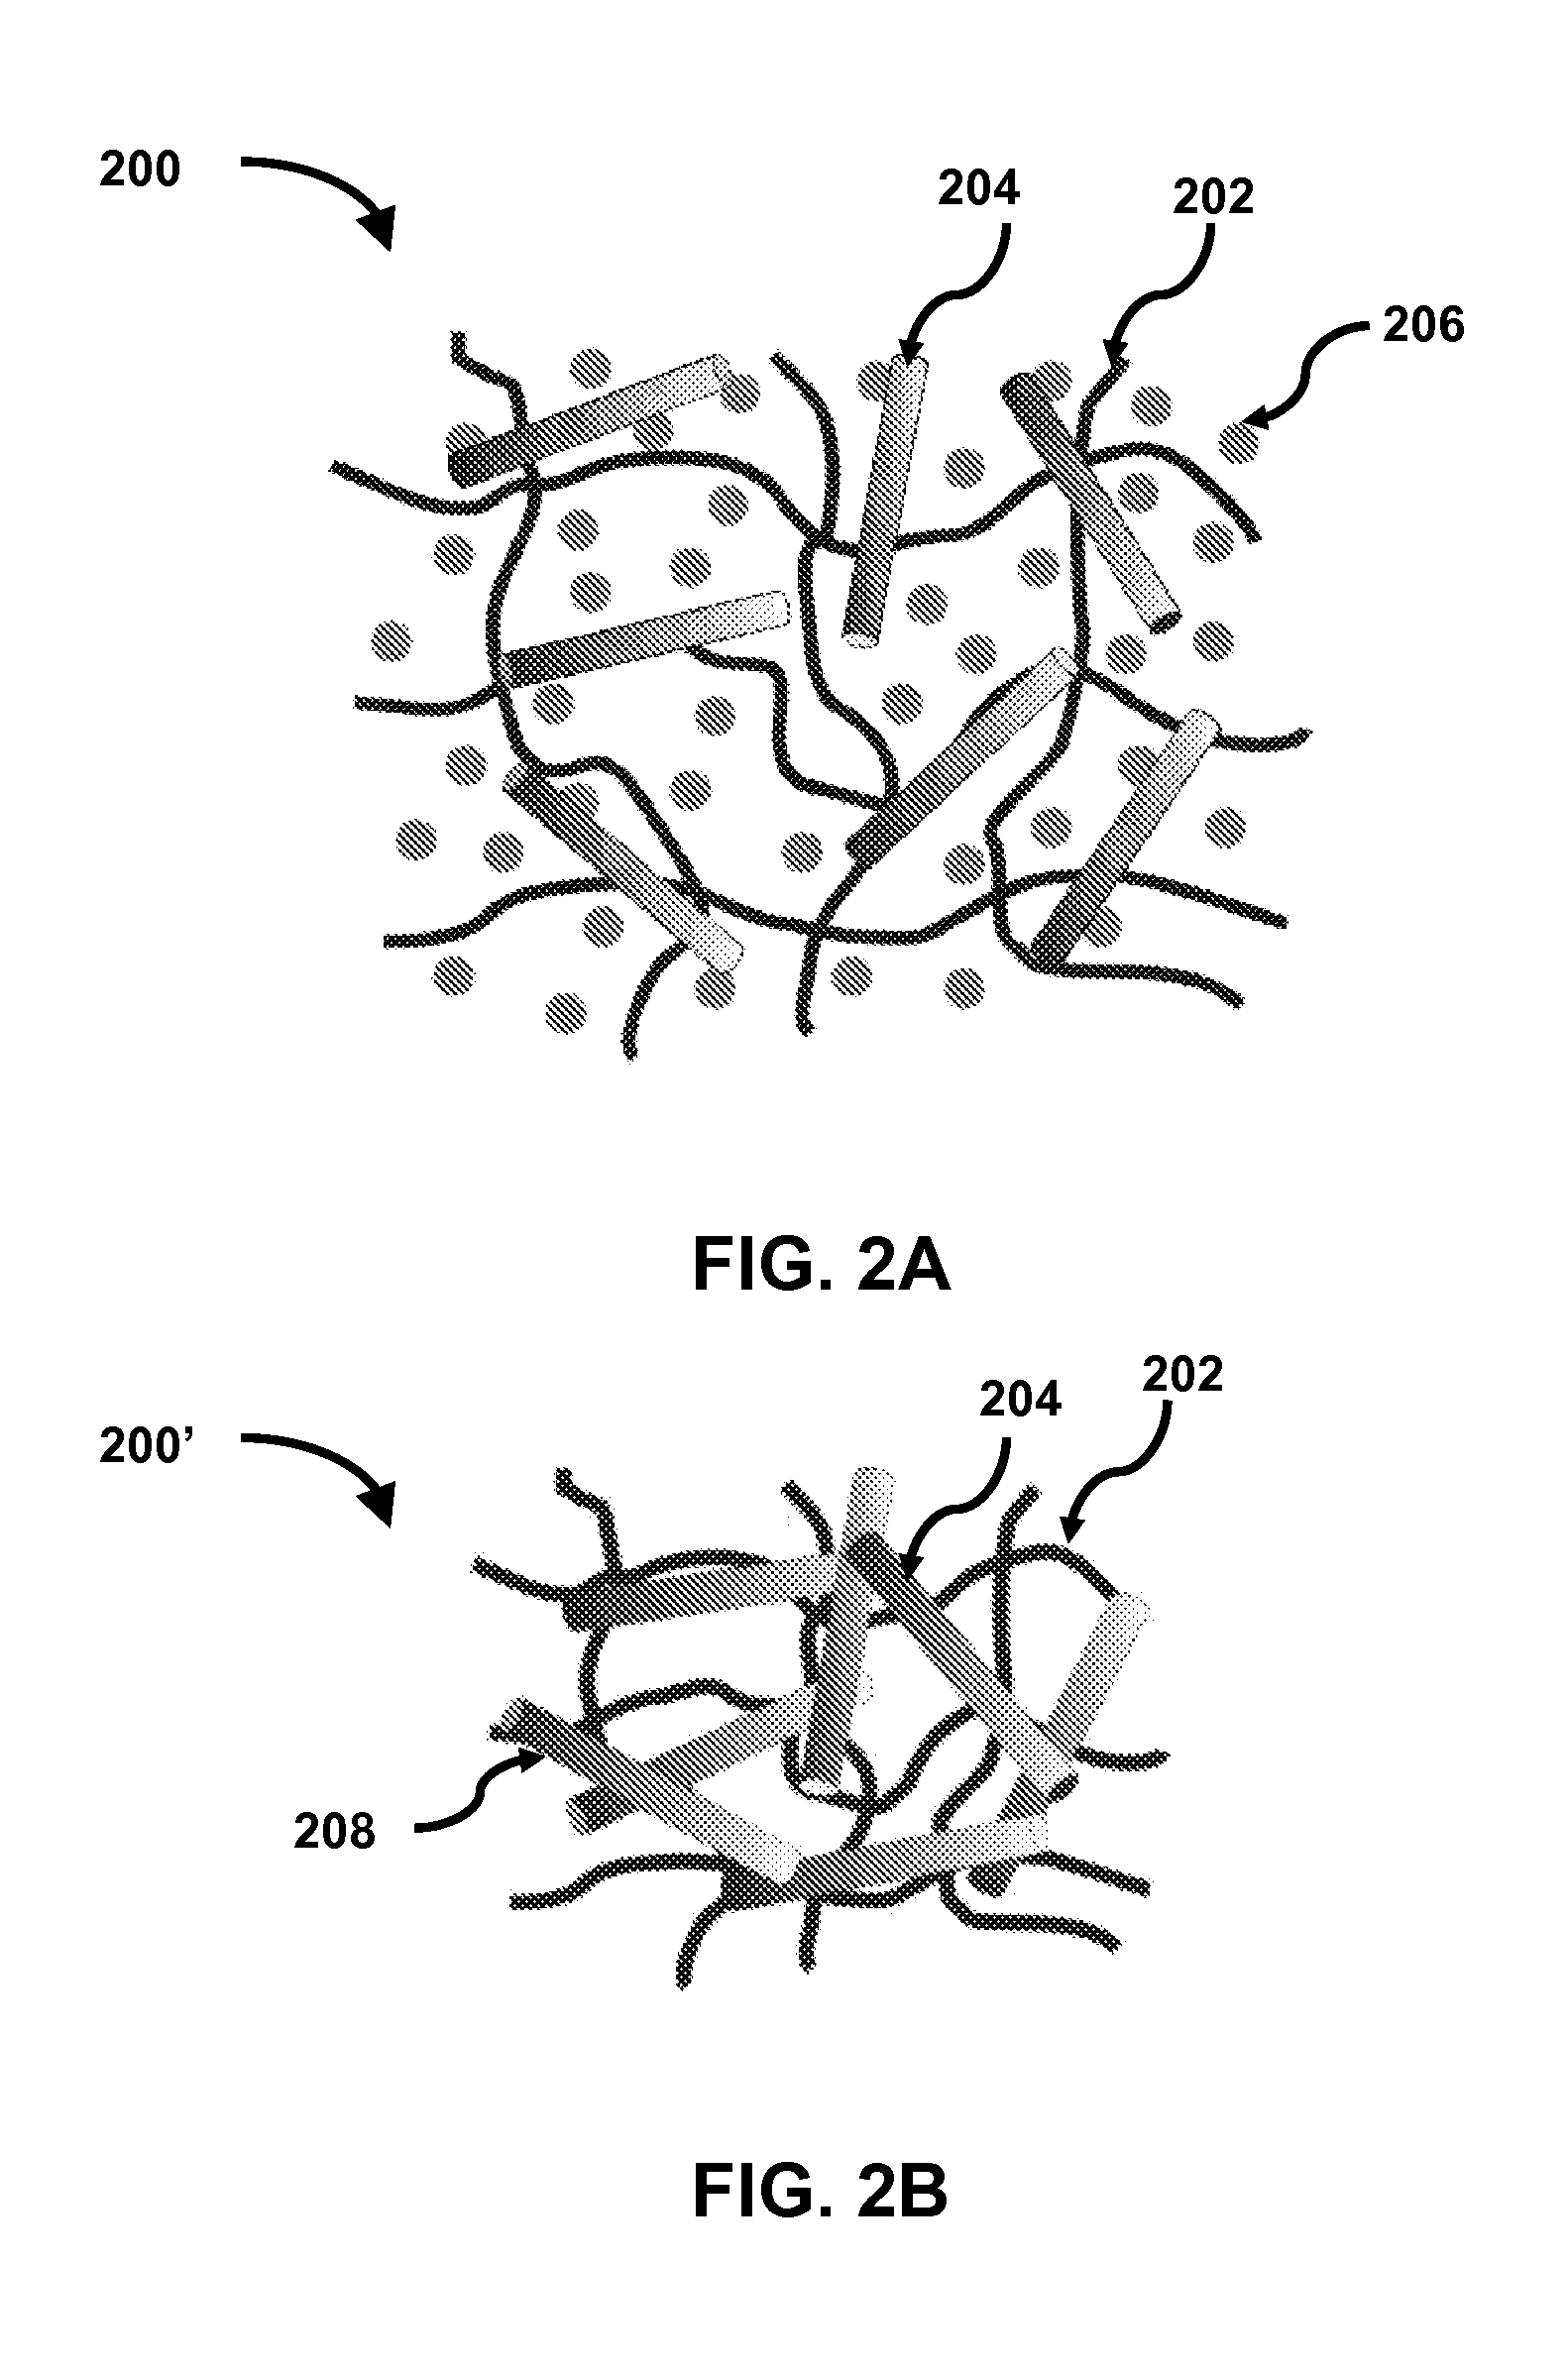 Solvent assisted processing to control the mechanical properties of electrically and/or thermally conductive polymer composites